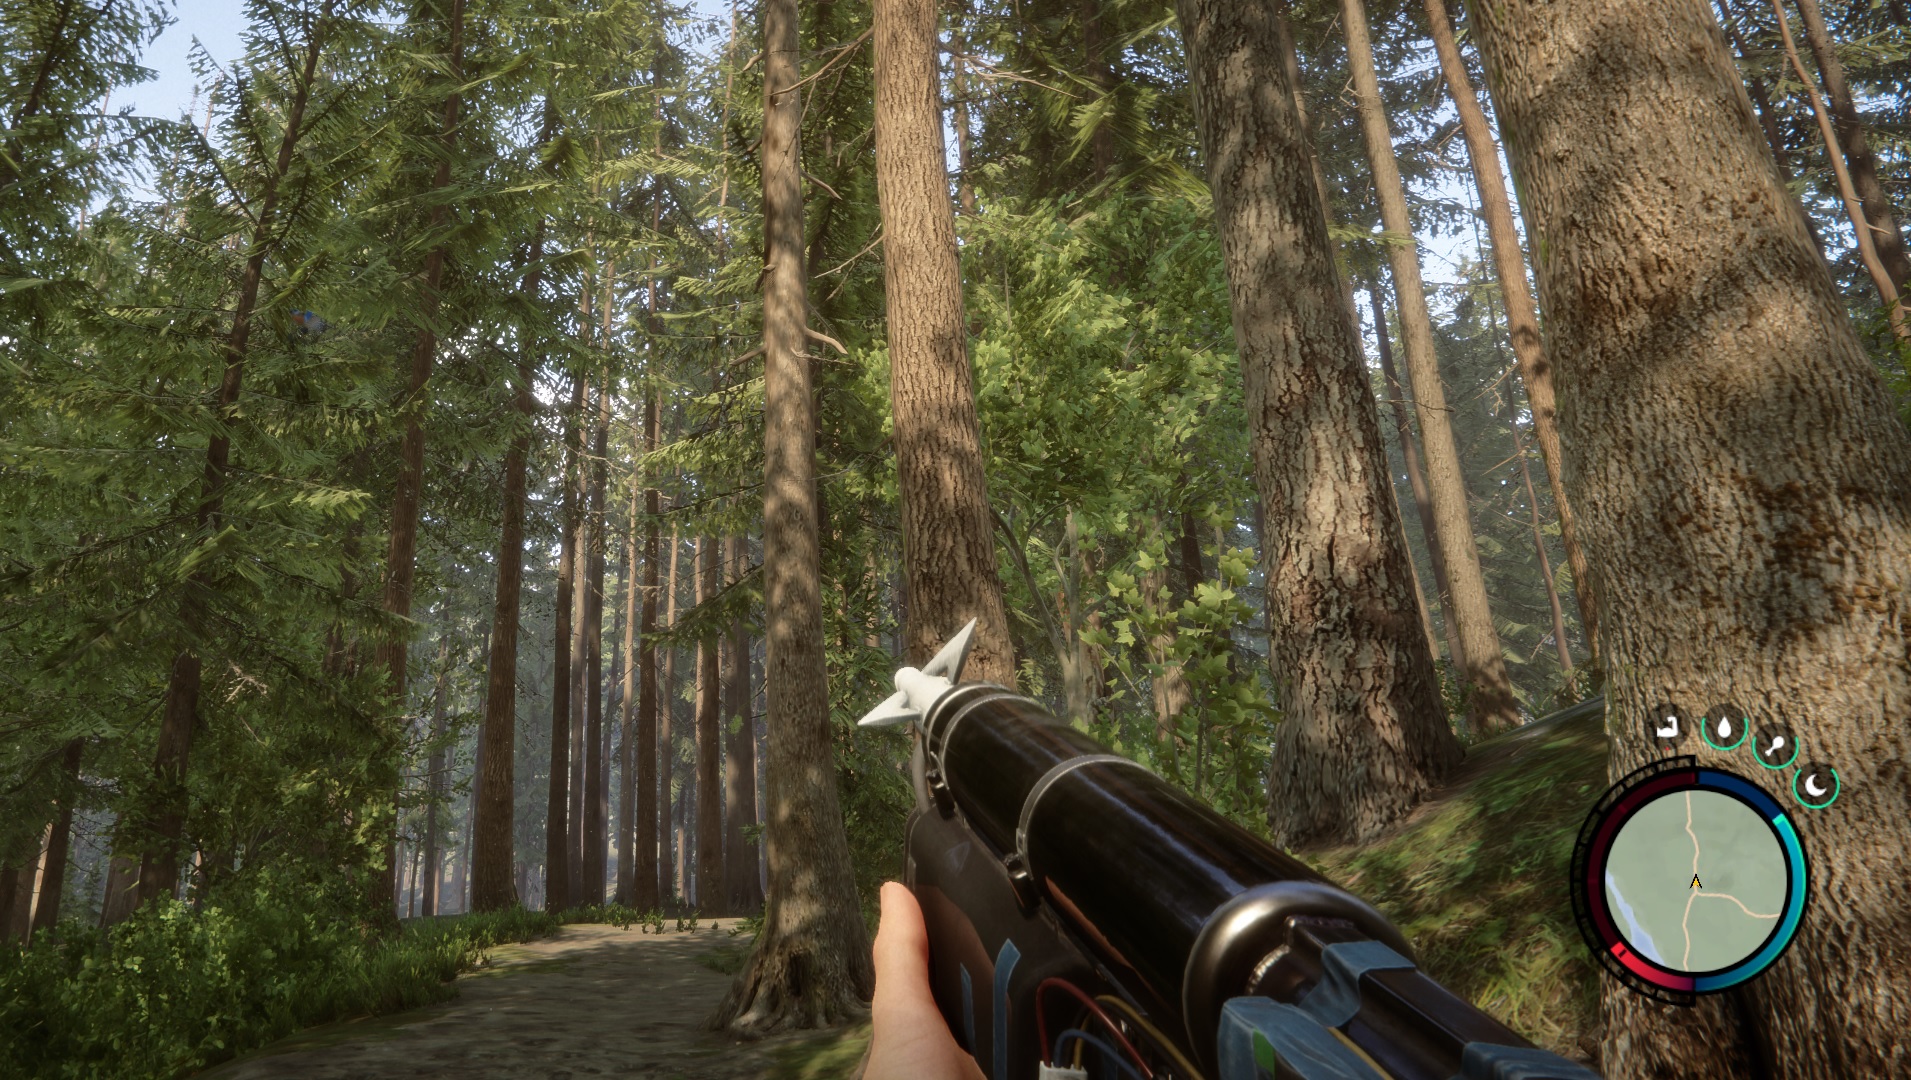  Where to find the rope gun for the zipline in Sons of the Forest 